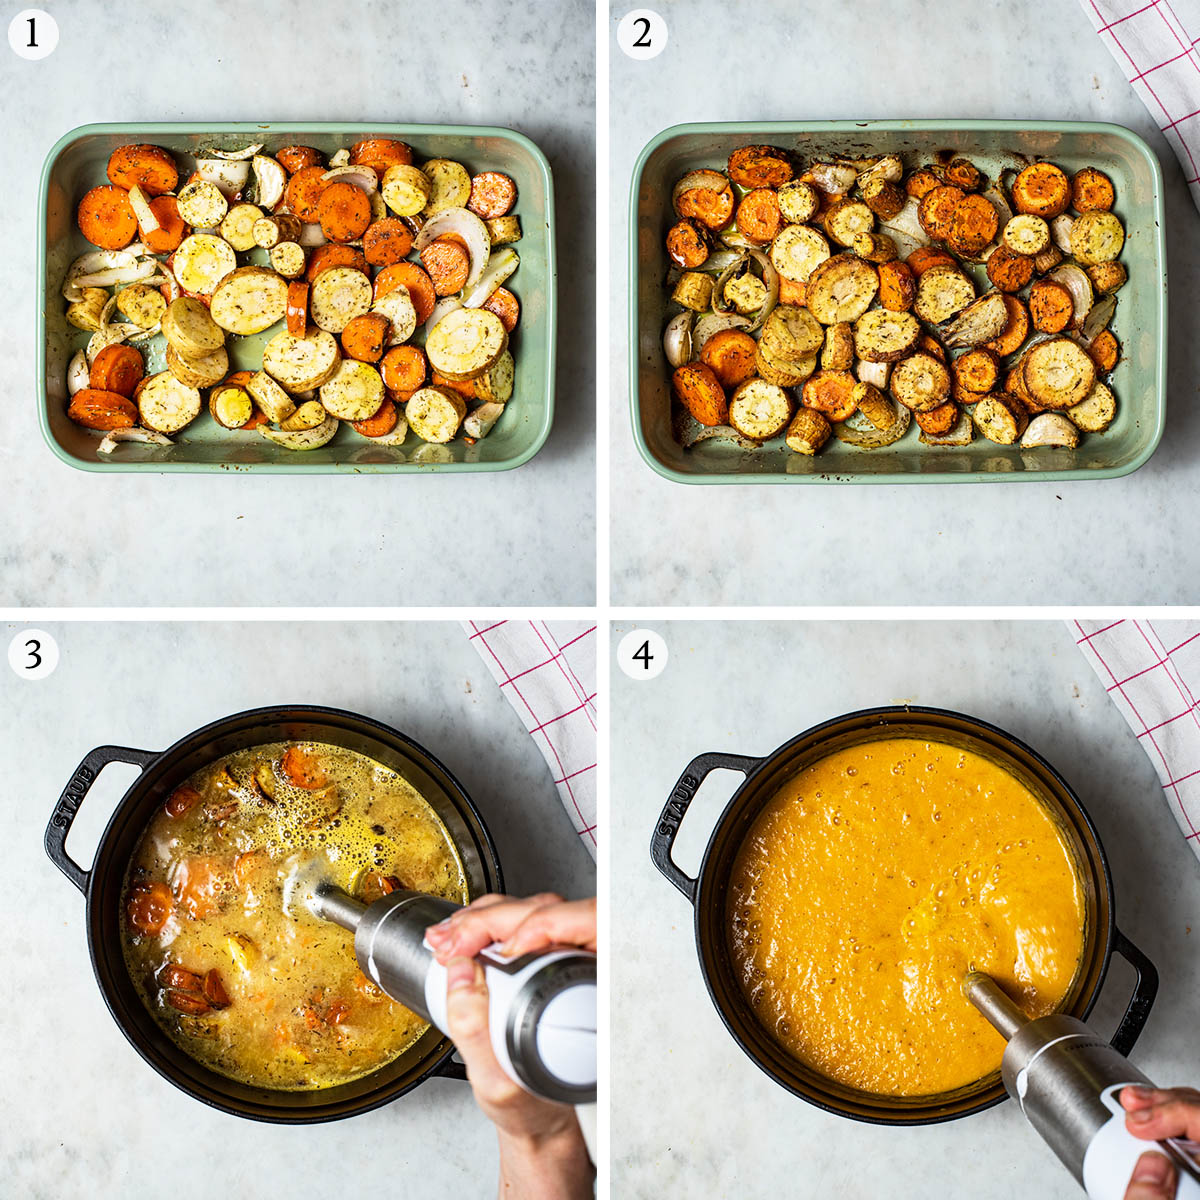 Roasted vegetable soup steps 1 to 4, roasting vegetables and mixing soup.